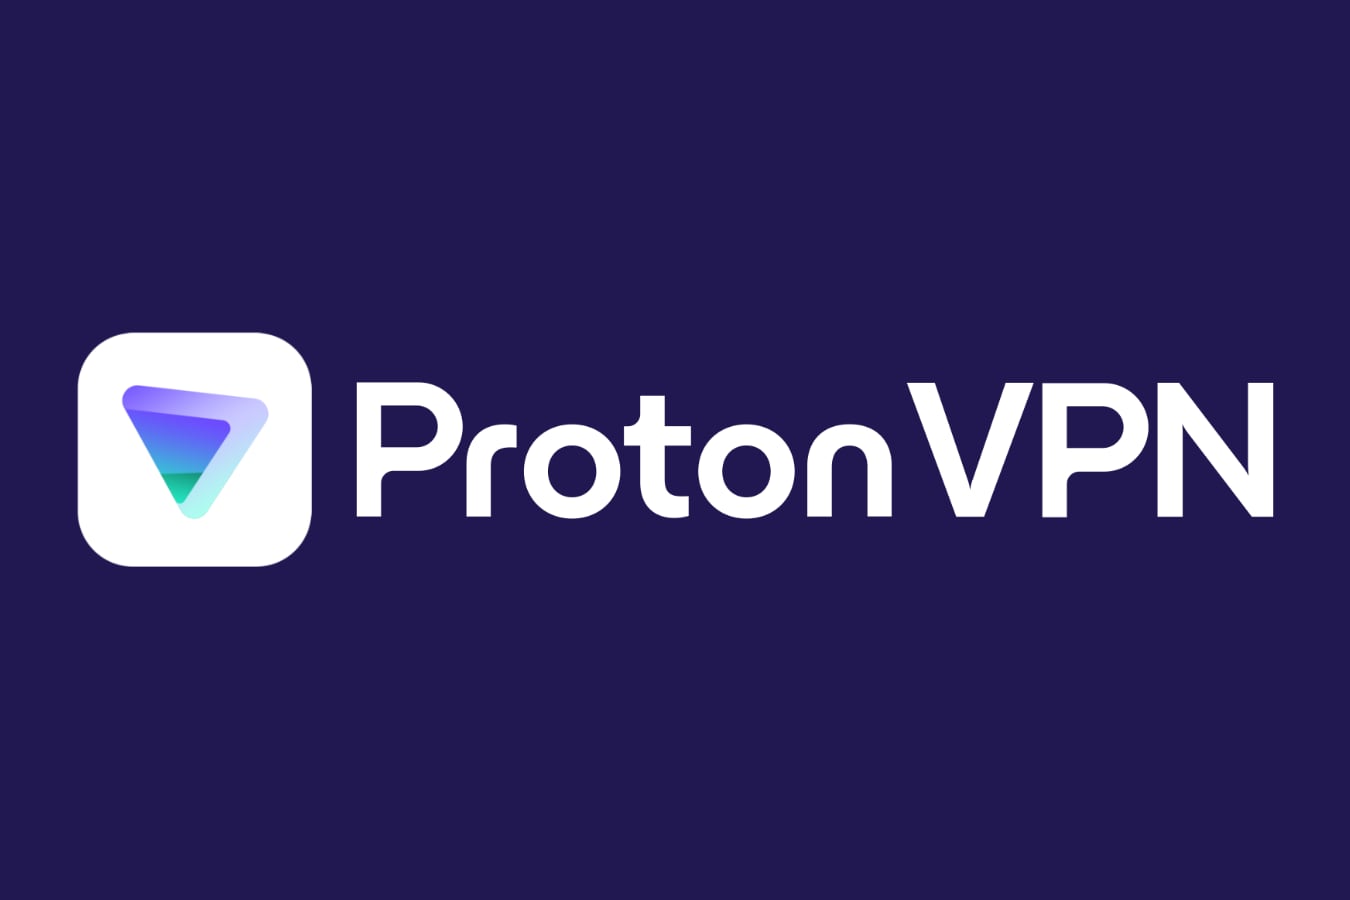 Proton VPN no-logs policy confirmed in latest audit